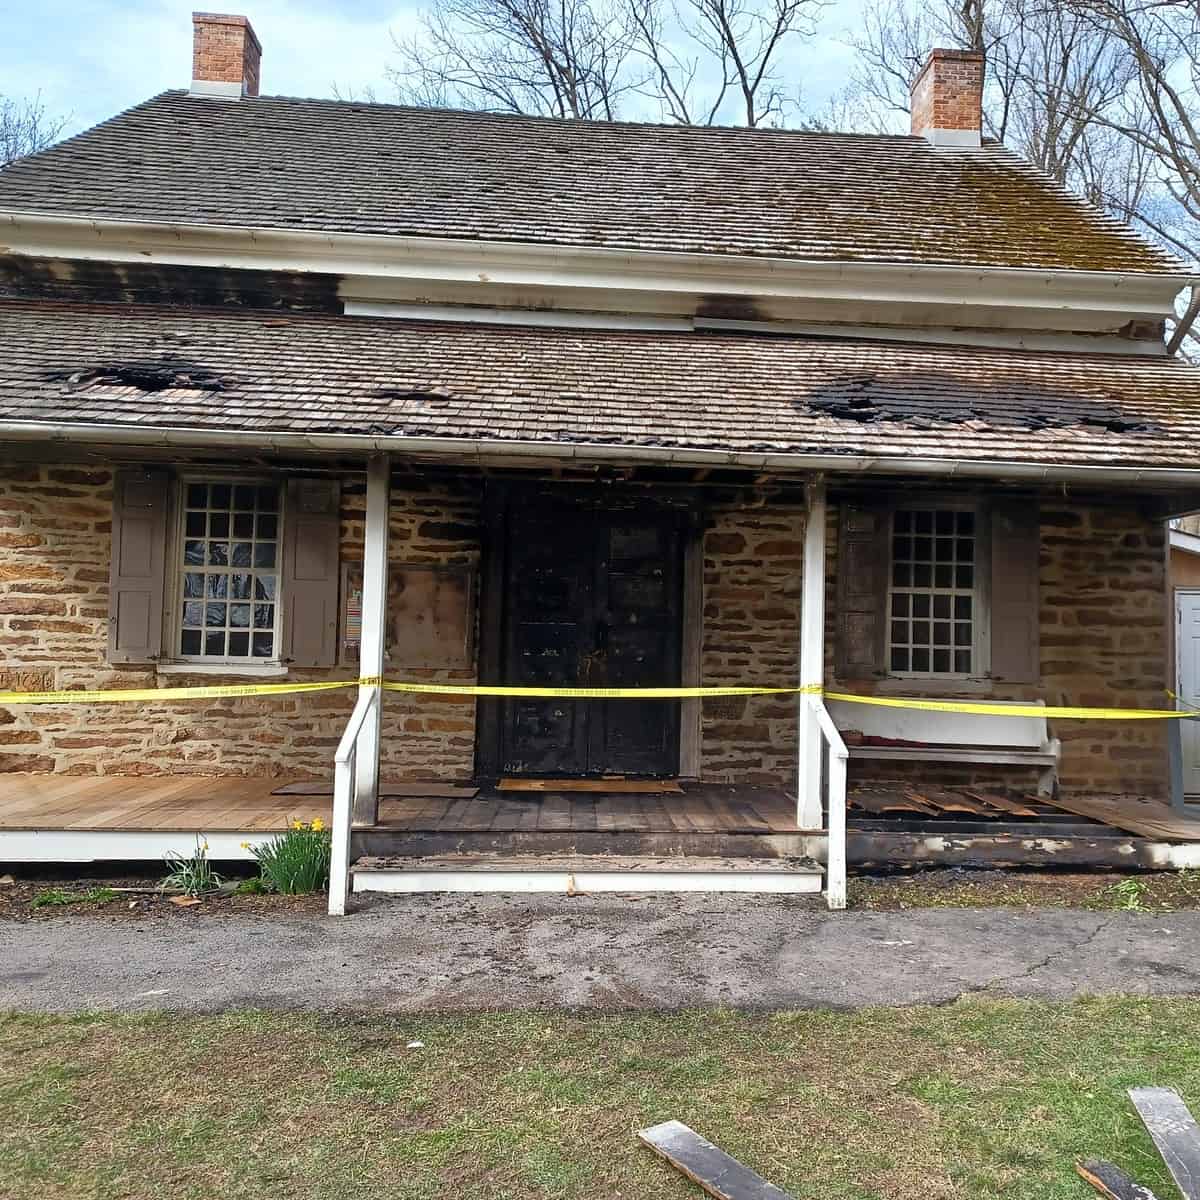 Fire damages historic Stony Brook Meeting House (updated Tuesday afternoon with photos of damage)